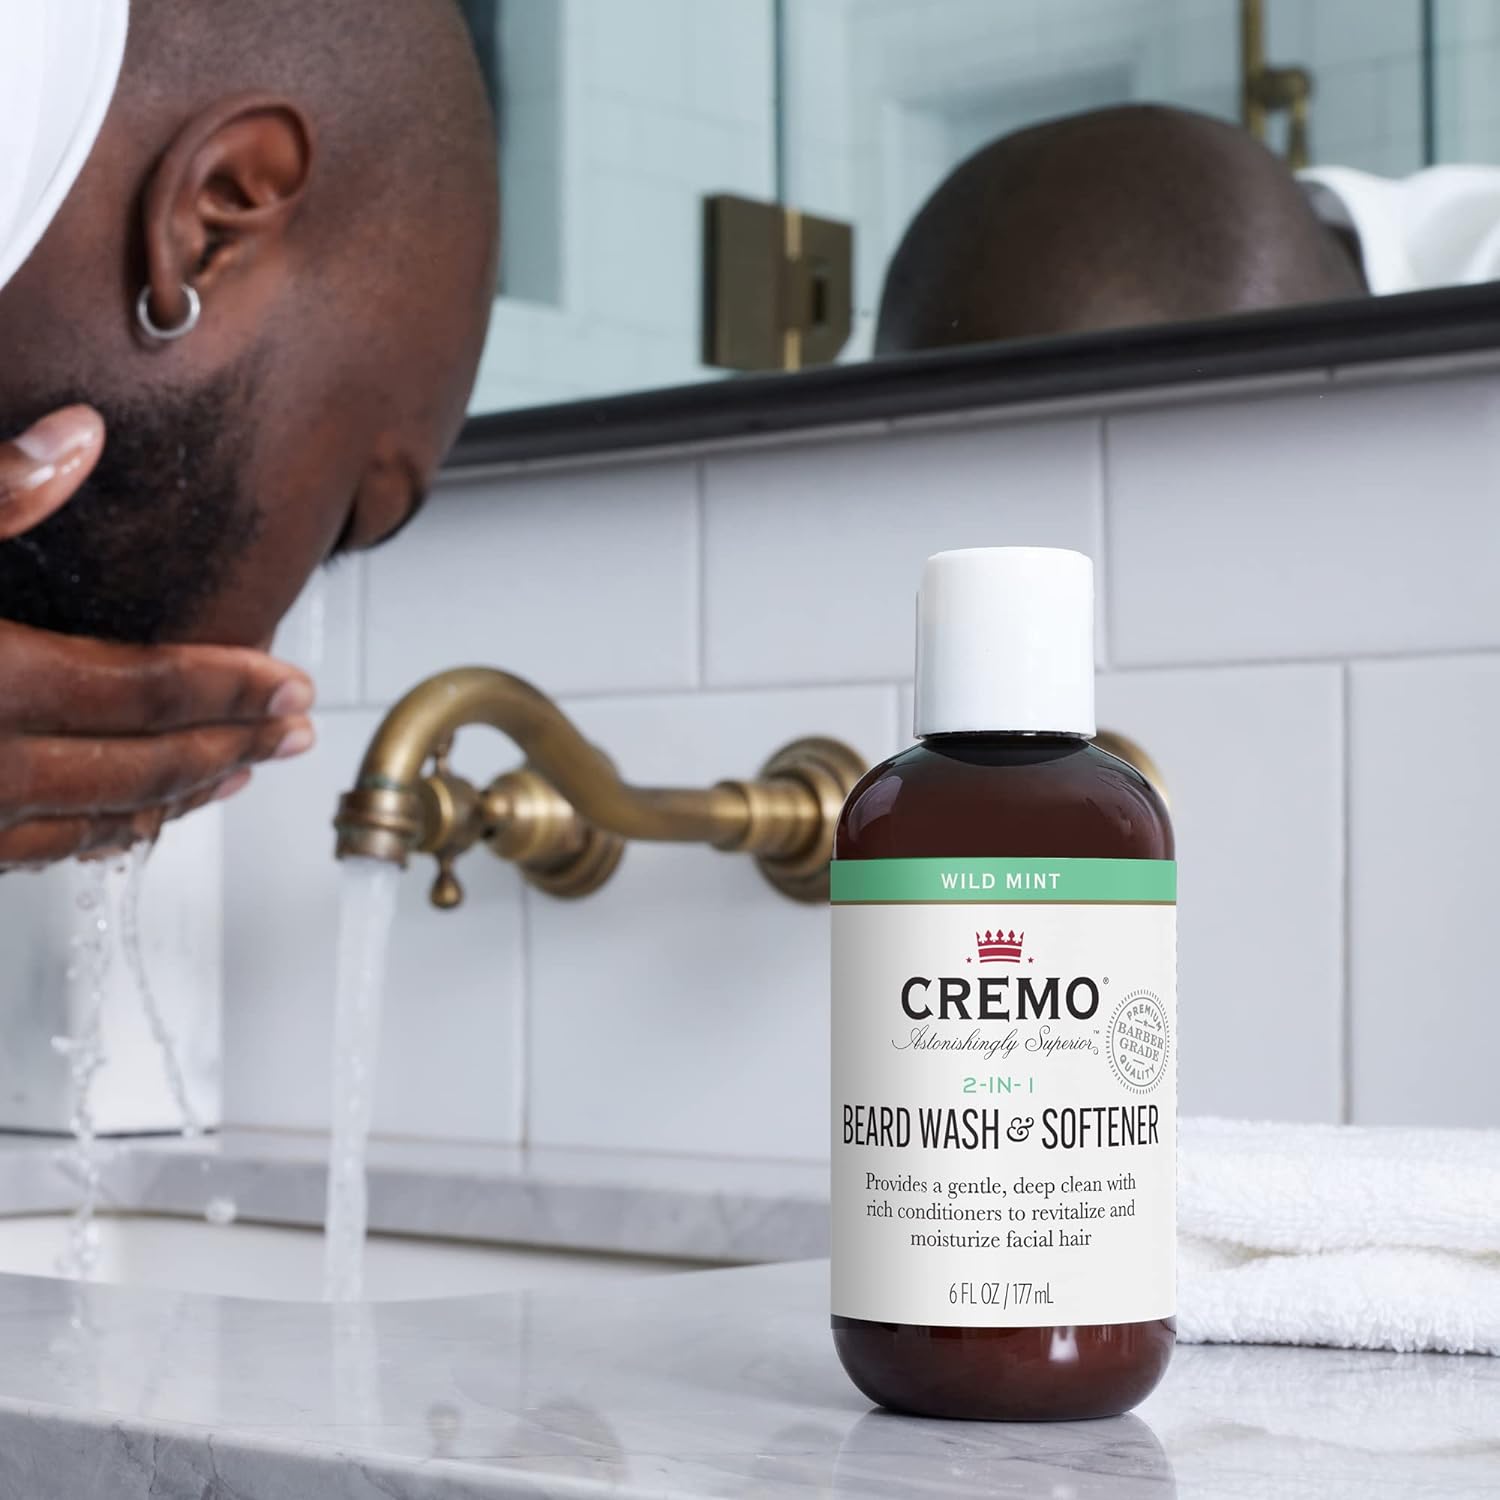 Cremo Wild Mint Beard and Face Wash, Specifically Designed to Clean Coarse Facial Hair, 6 Fluid Oz : Beauty & Personal Care